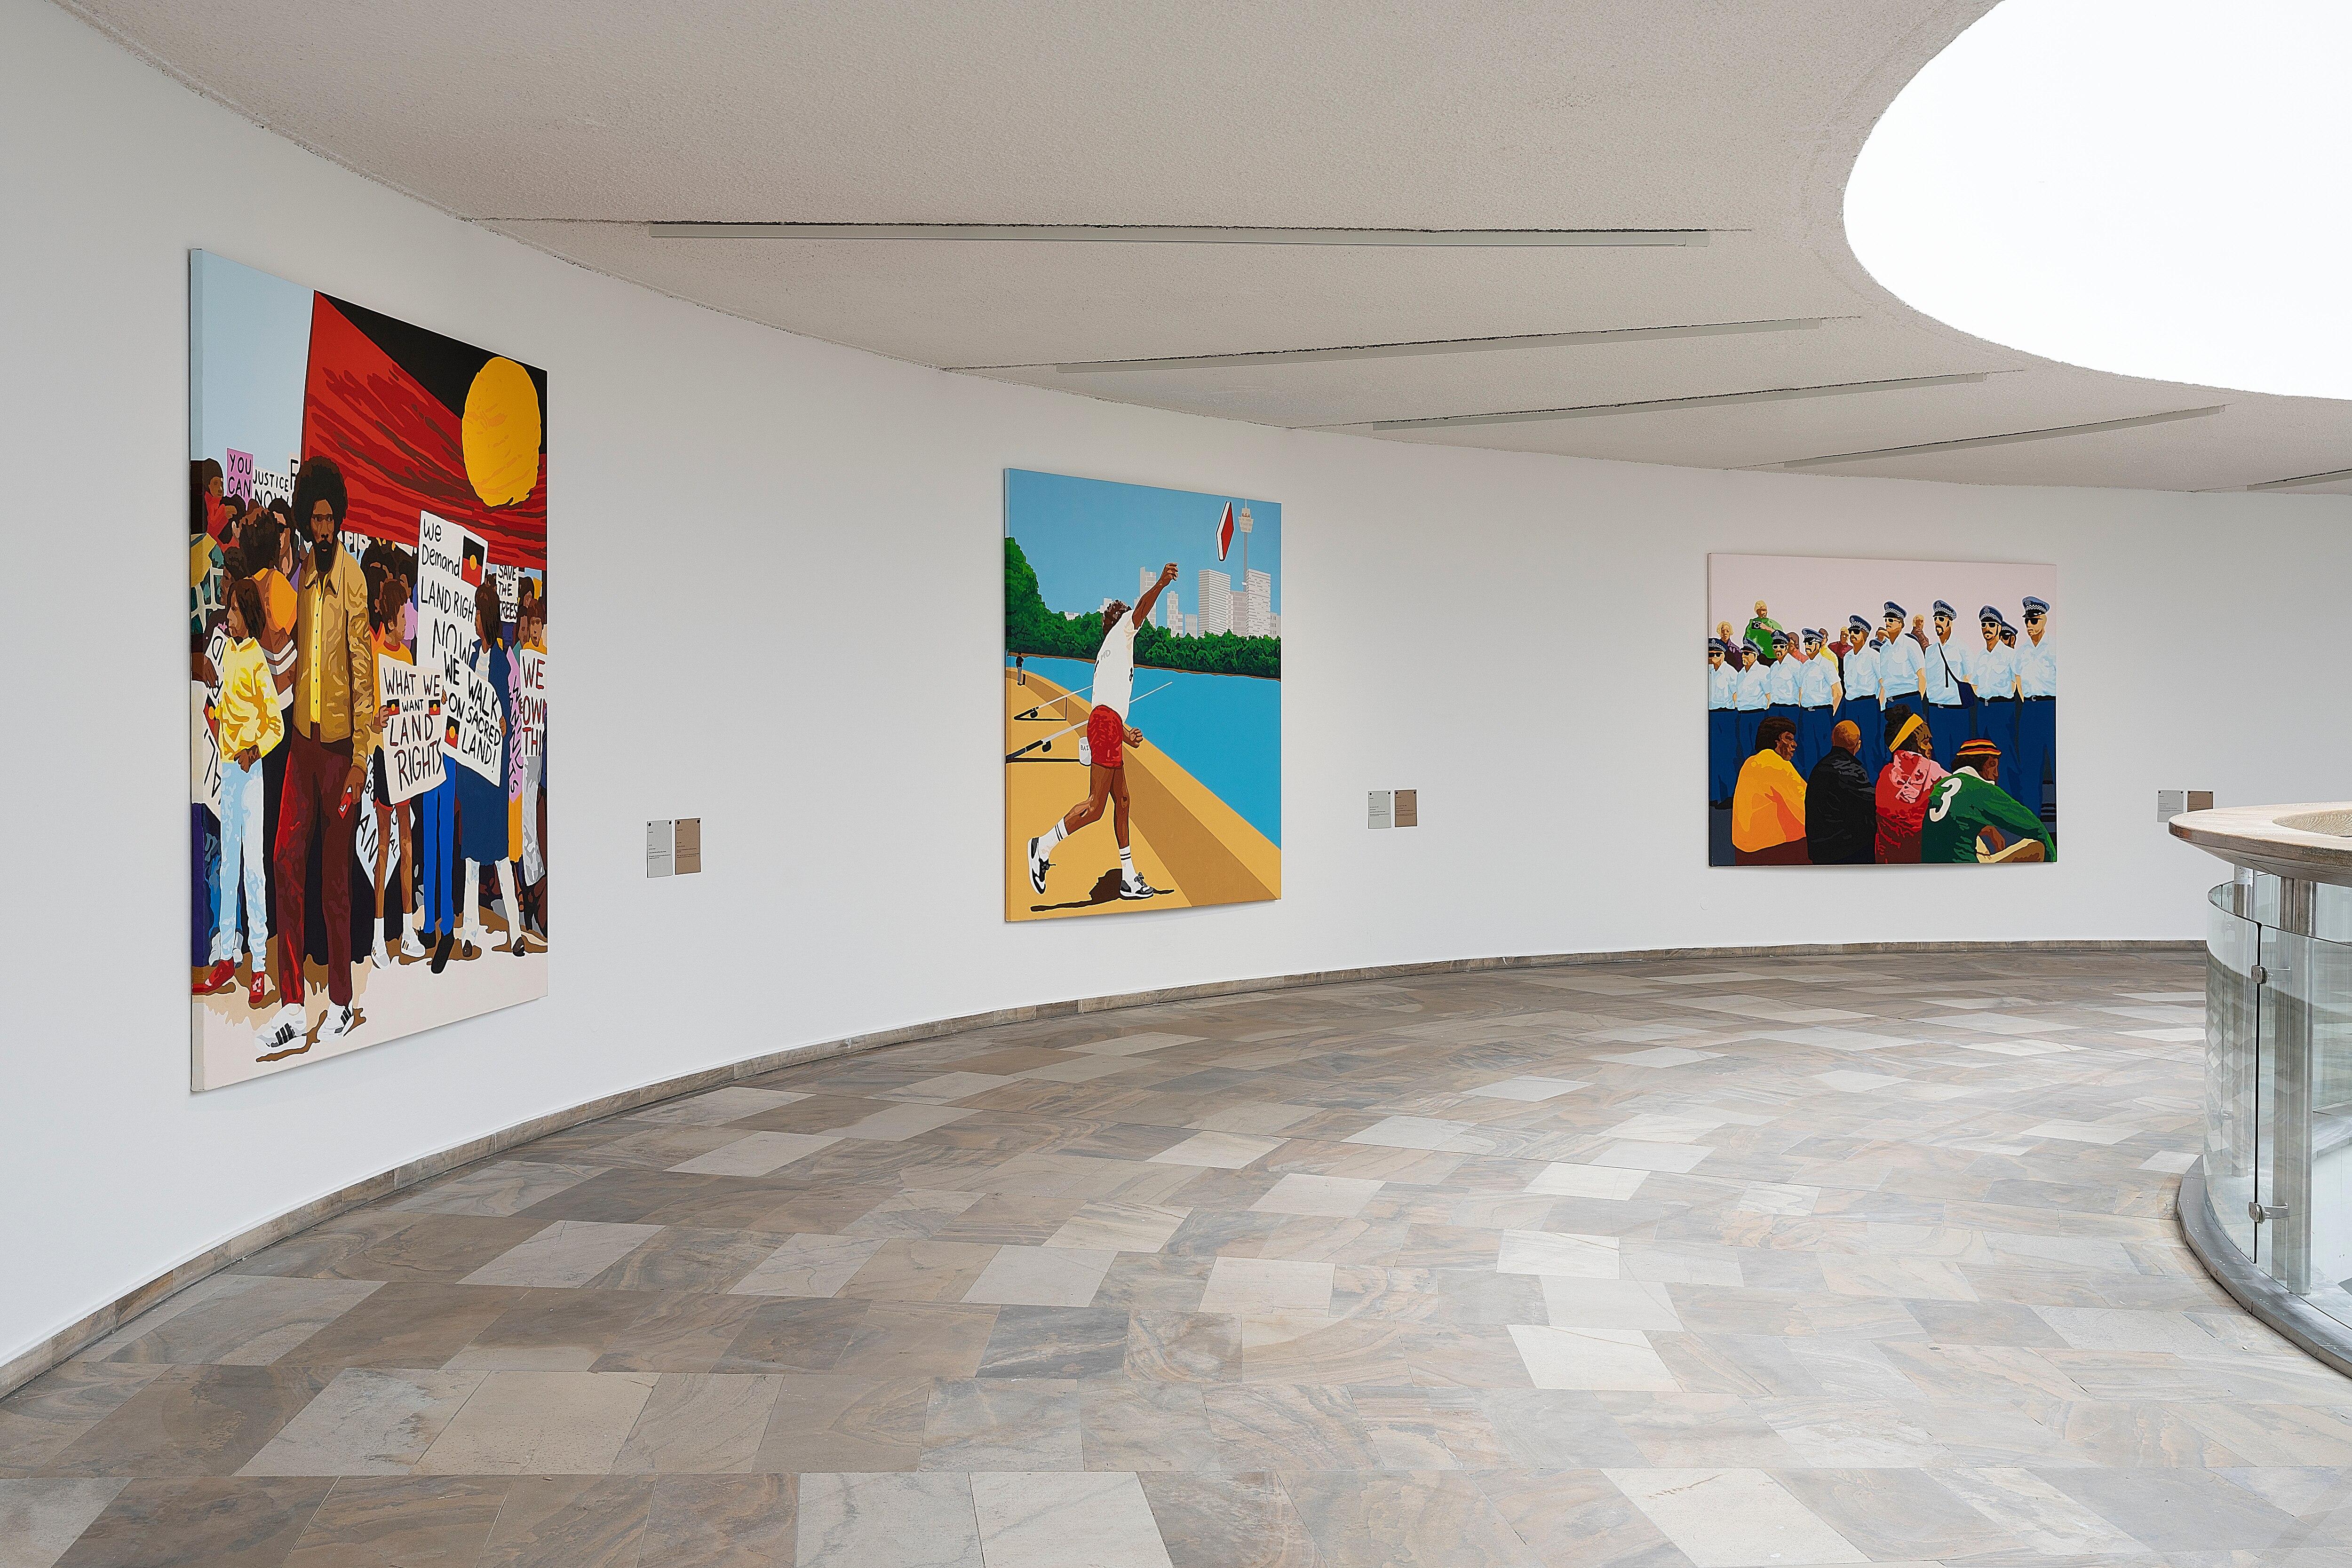 Three large canvas paintings hang on the white wall of a galley, each depicting Indigenous Australian subjects.